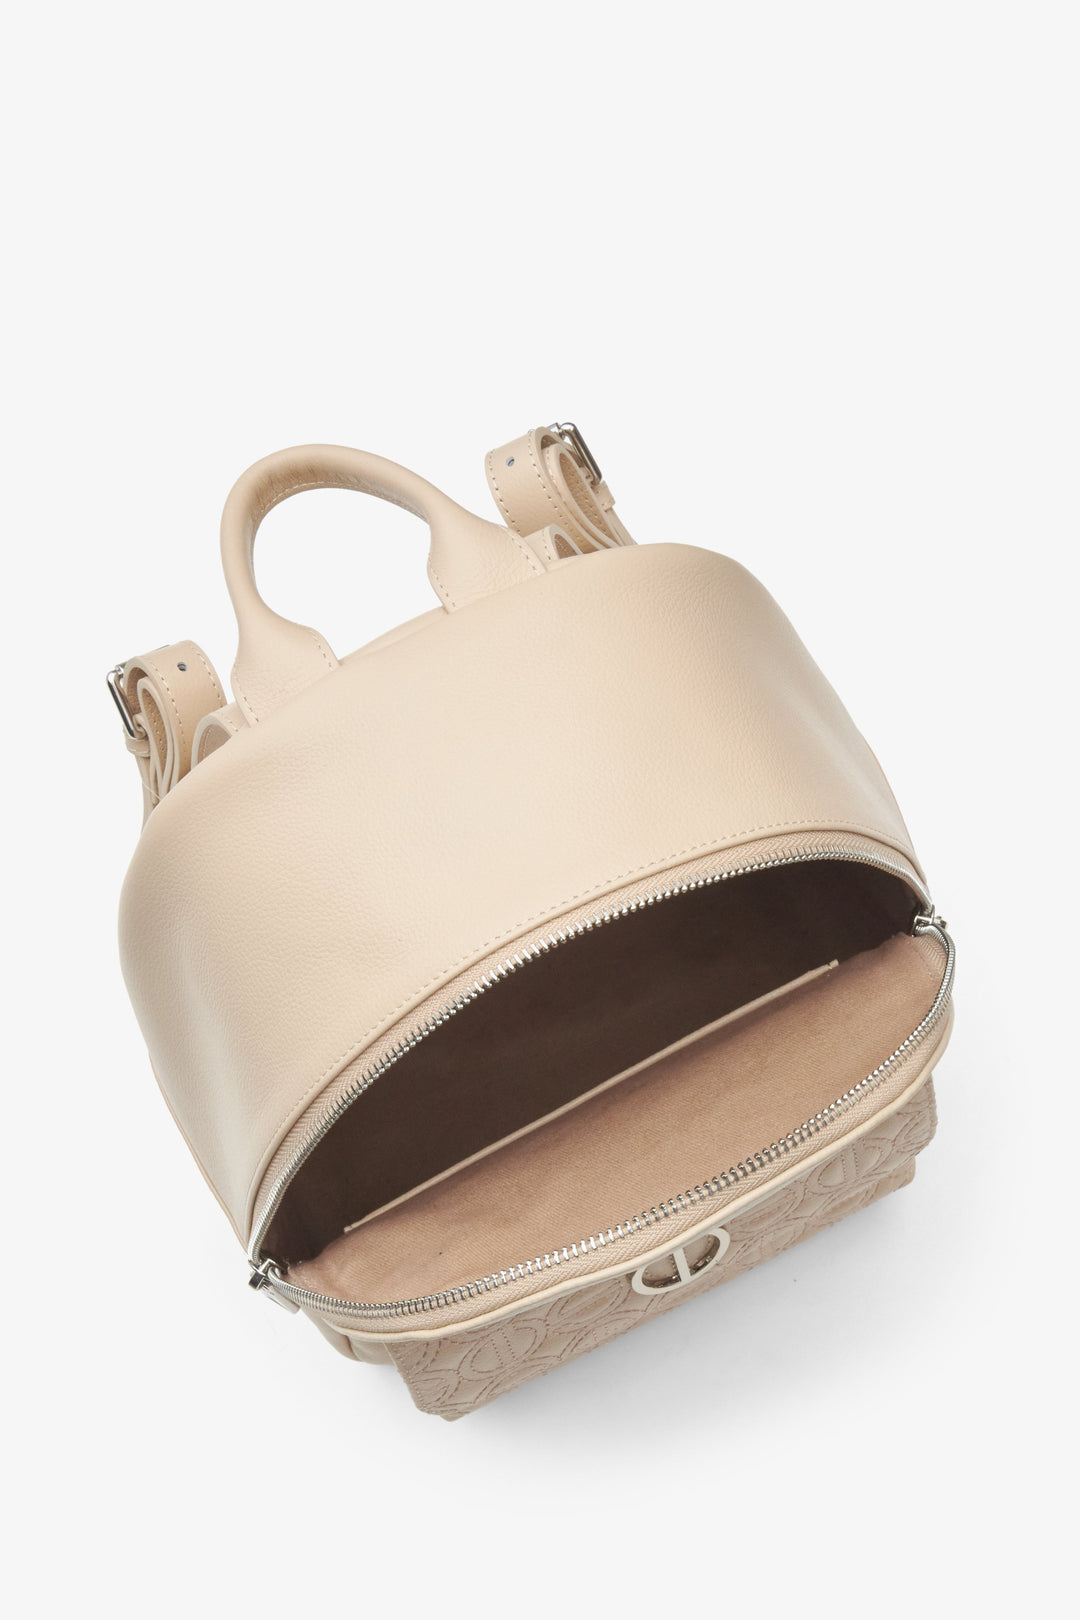 Light beige leather Estro backpack - close-up on the interior of the model.